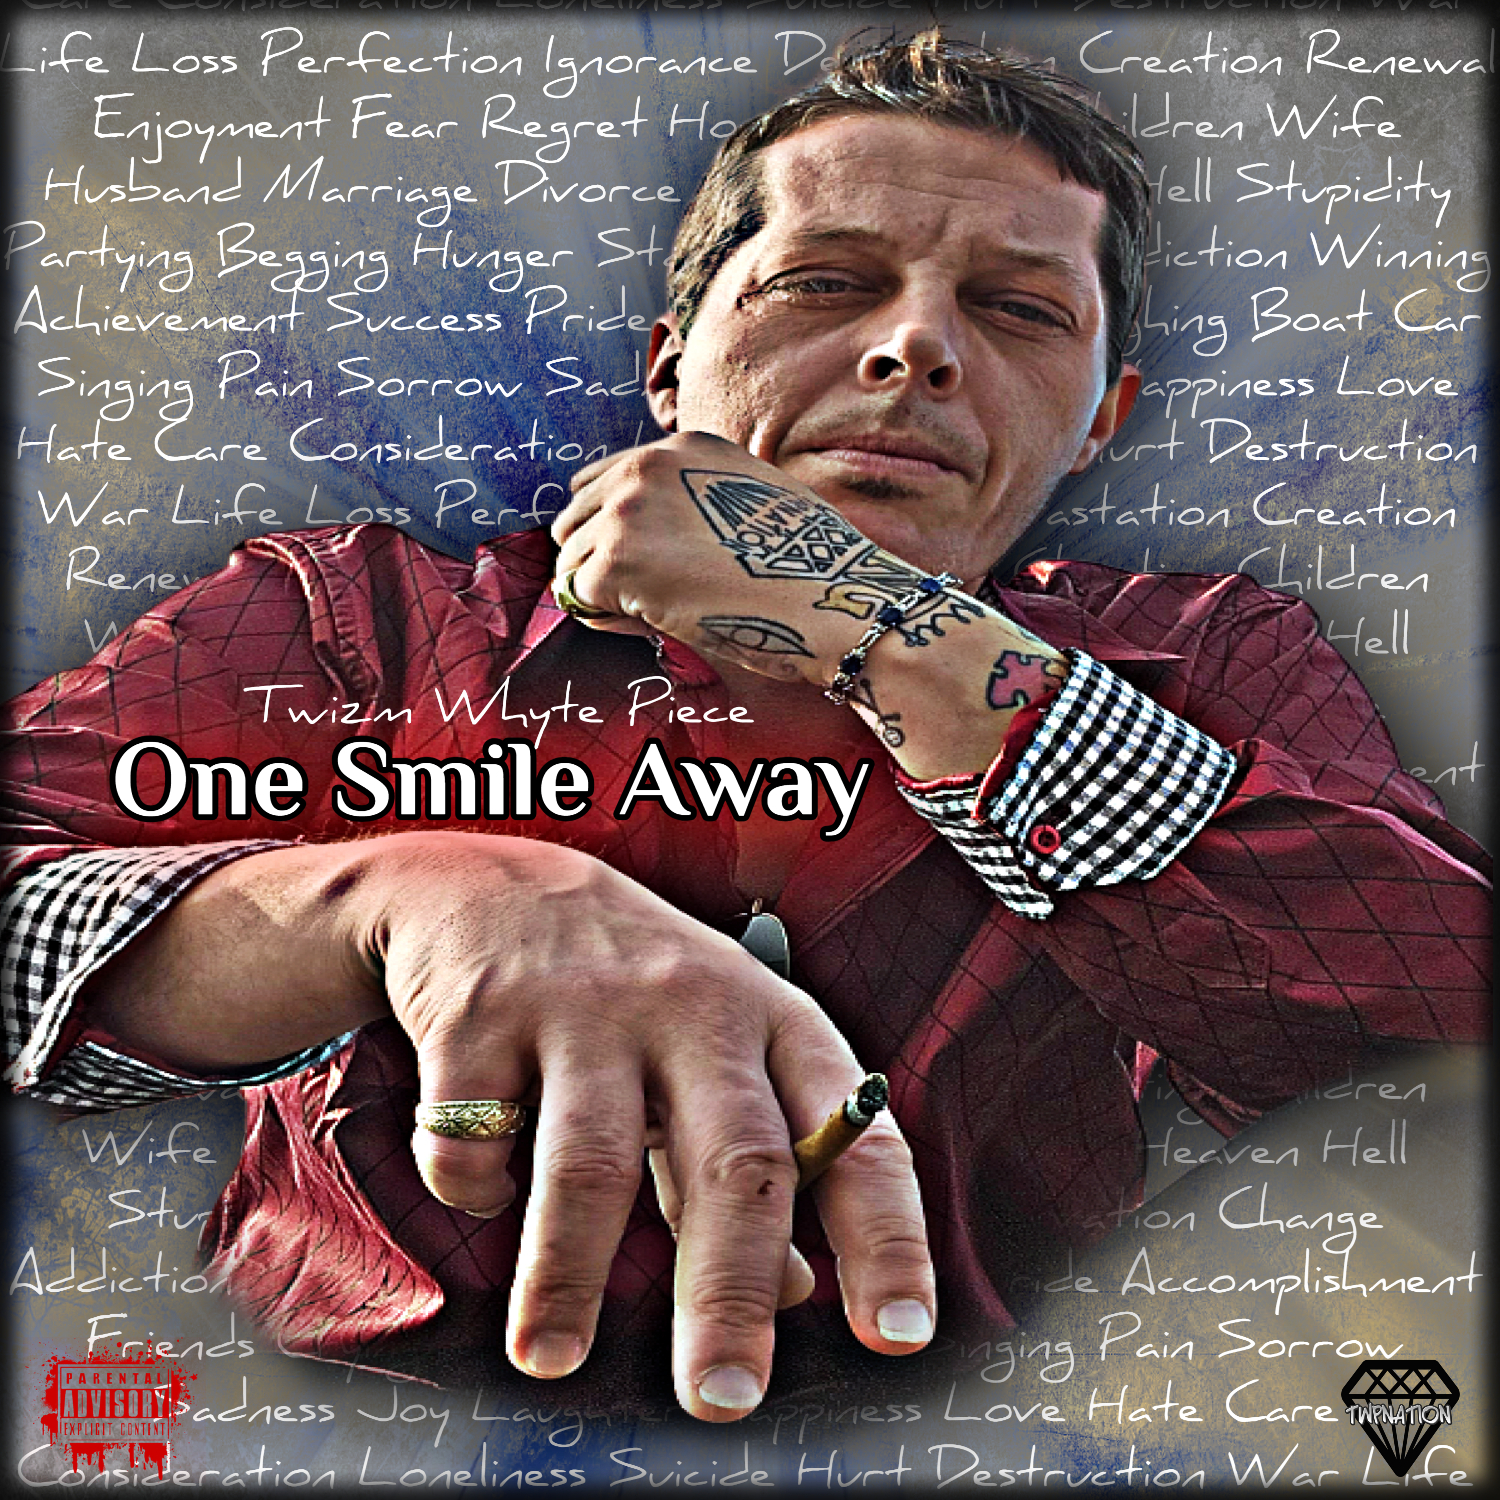 Twizm Whyte Piece’s Highly Anticipated New Album “One Smile Away” Now Available Worldwide